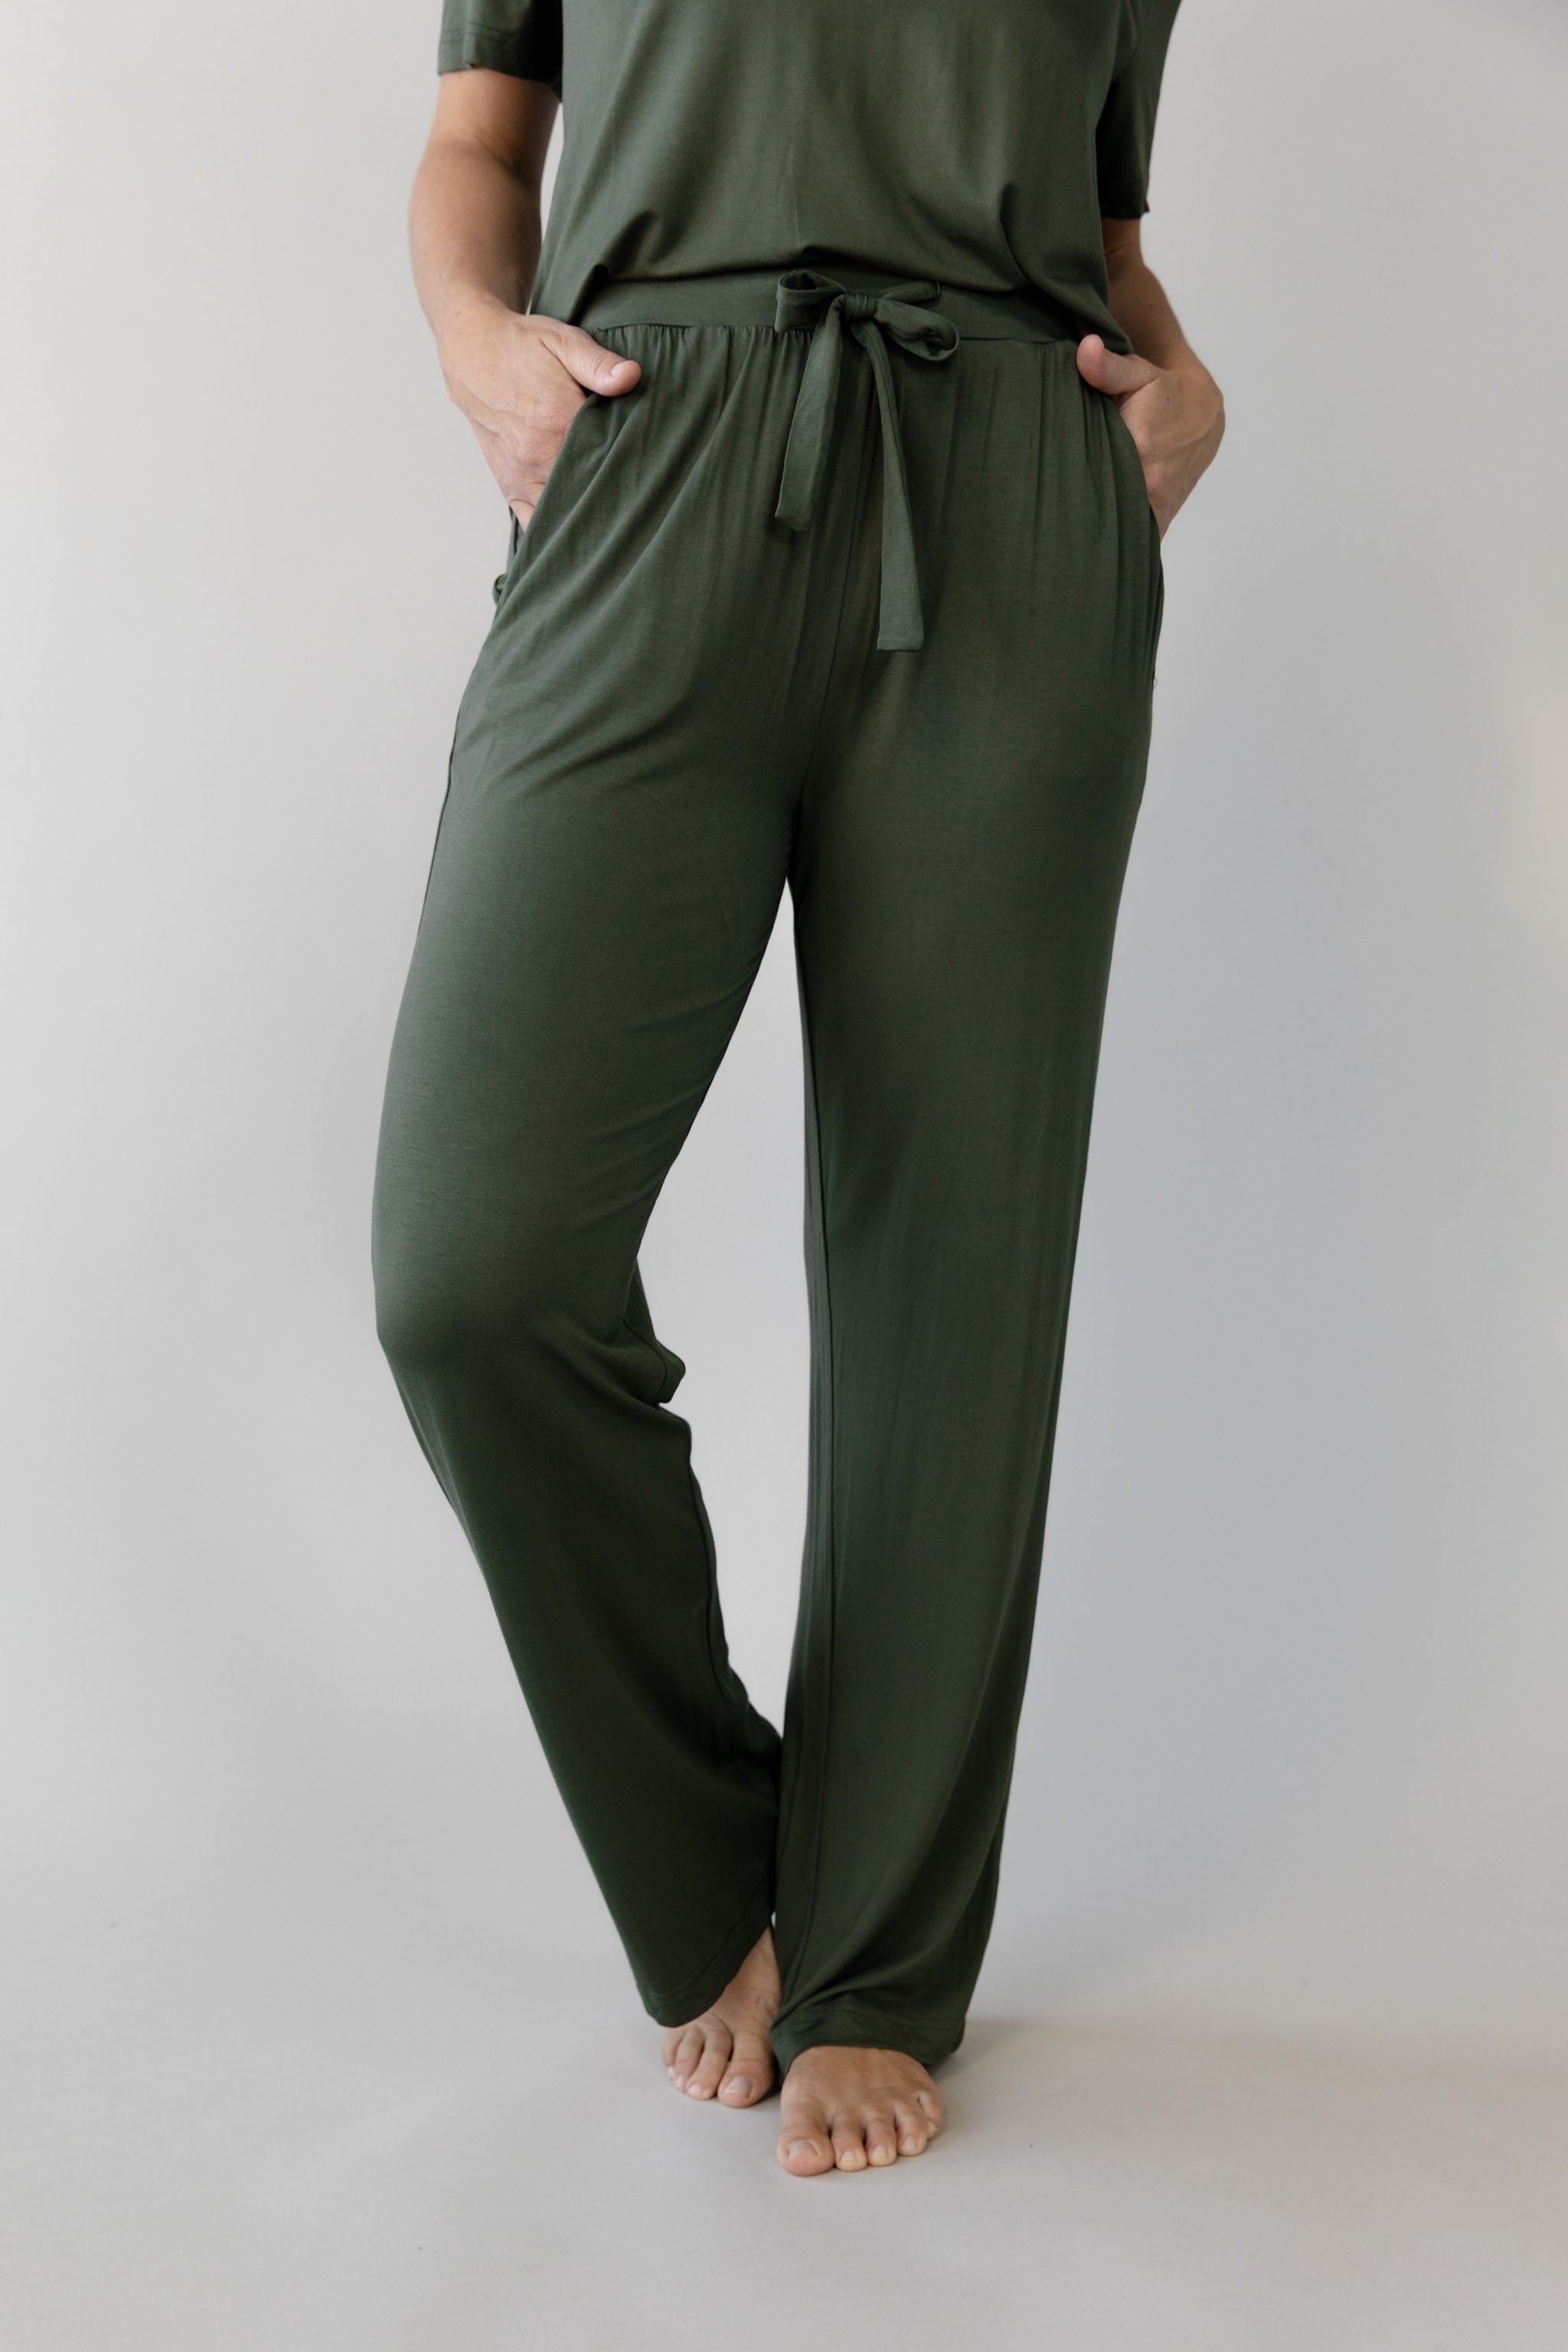 Stretch Knit Bamboo Pant - Olive / XS